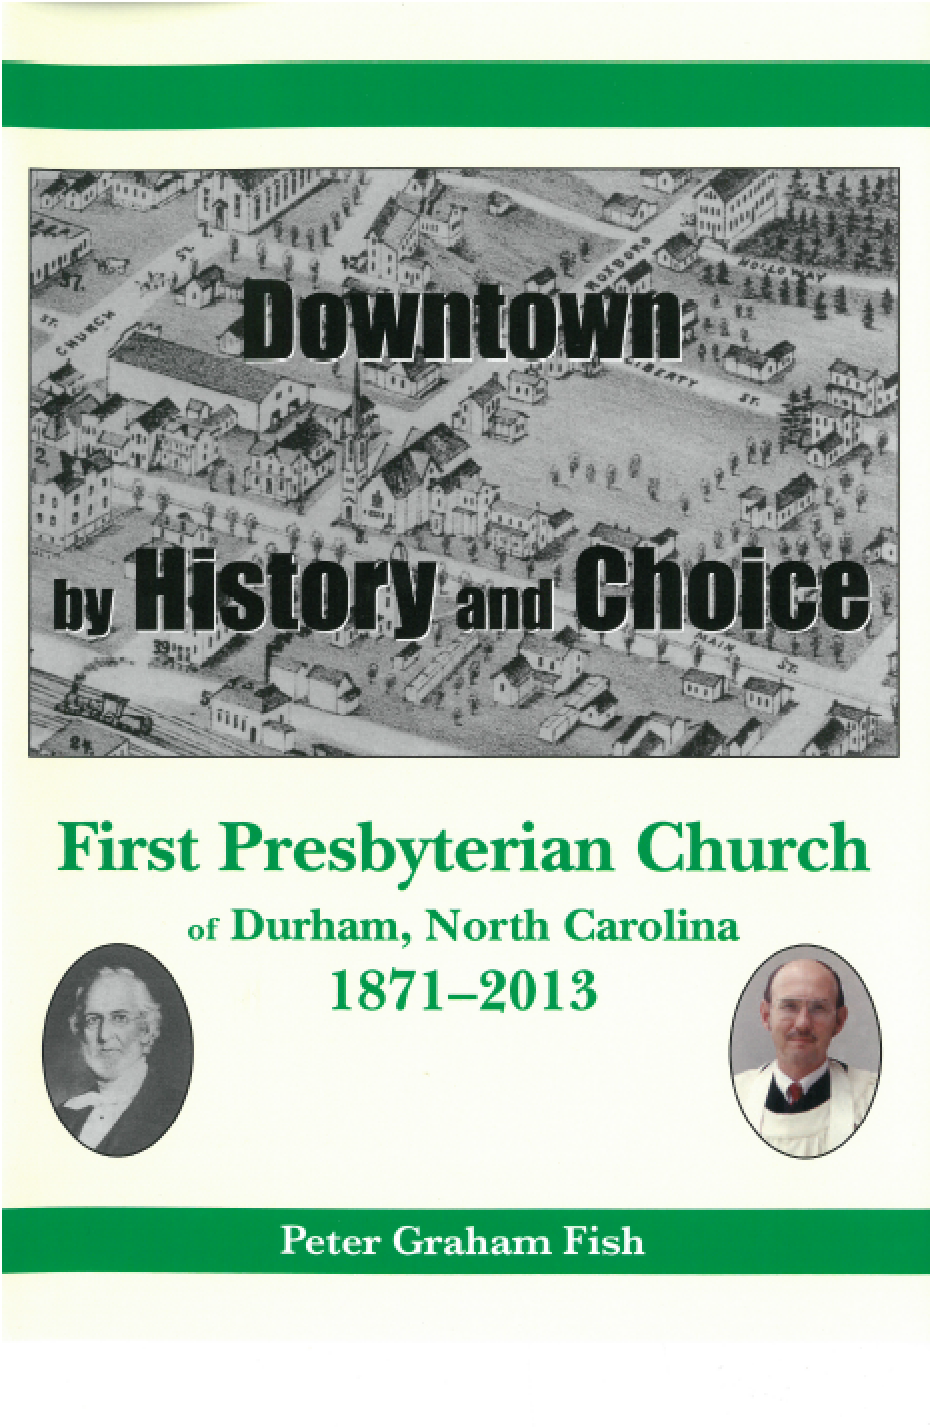 It’s available!  New book on the history of FPC